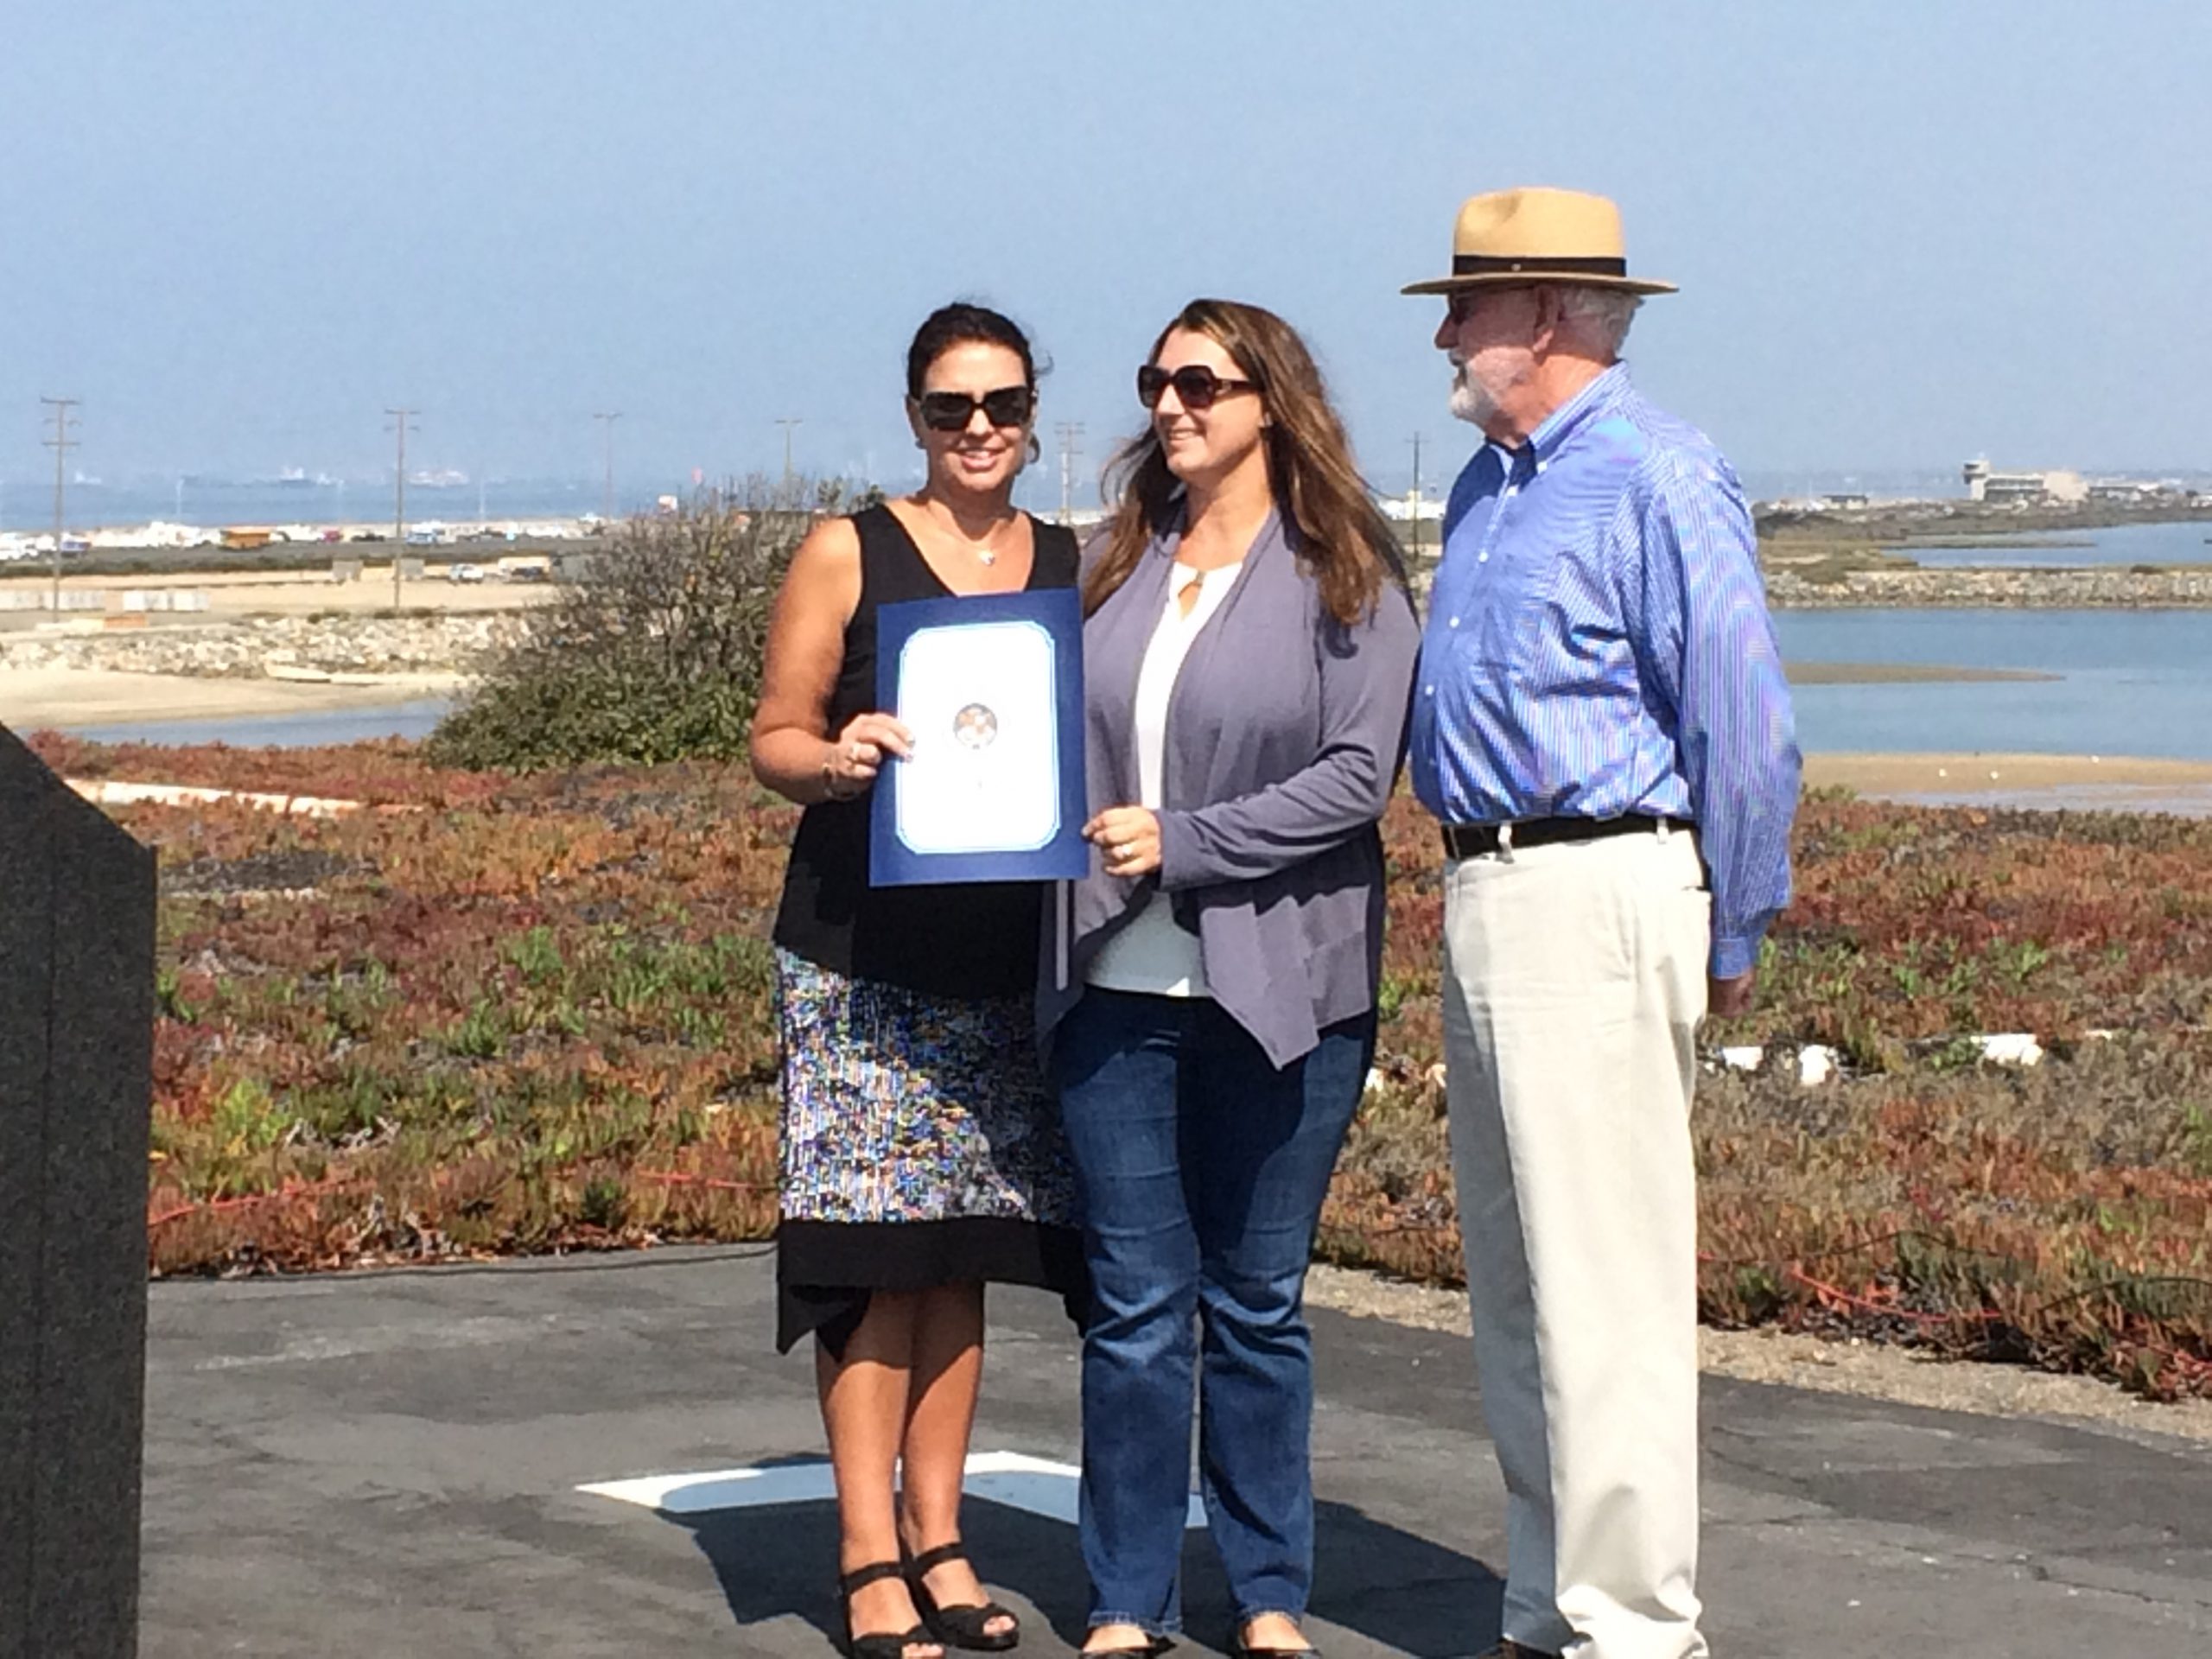 Speakers at the 10th anniversary celebration for the Bolsa Chica Lowlands Restoration Project